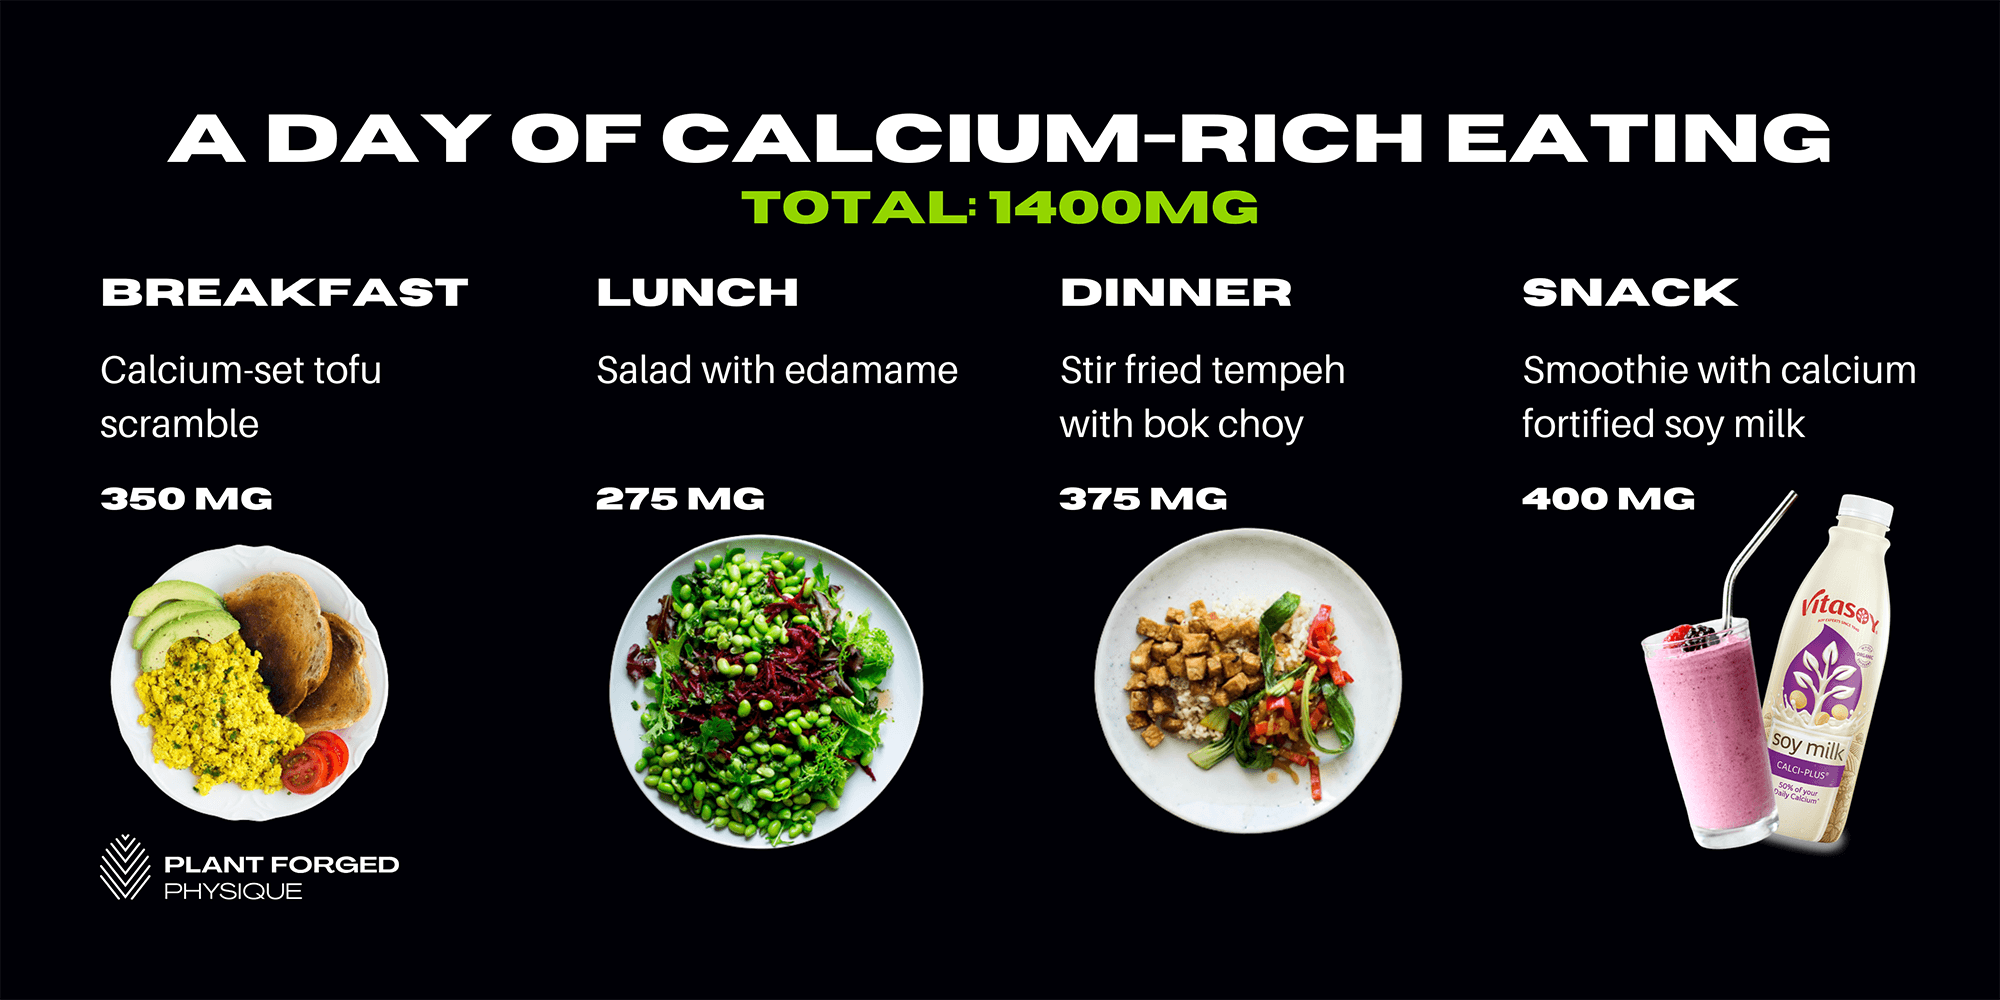 A day of calcium-rich eating